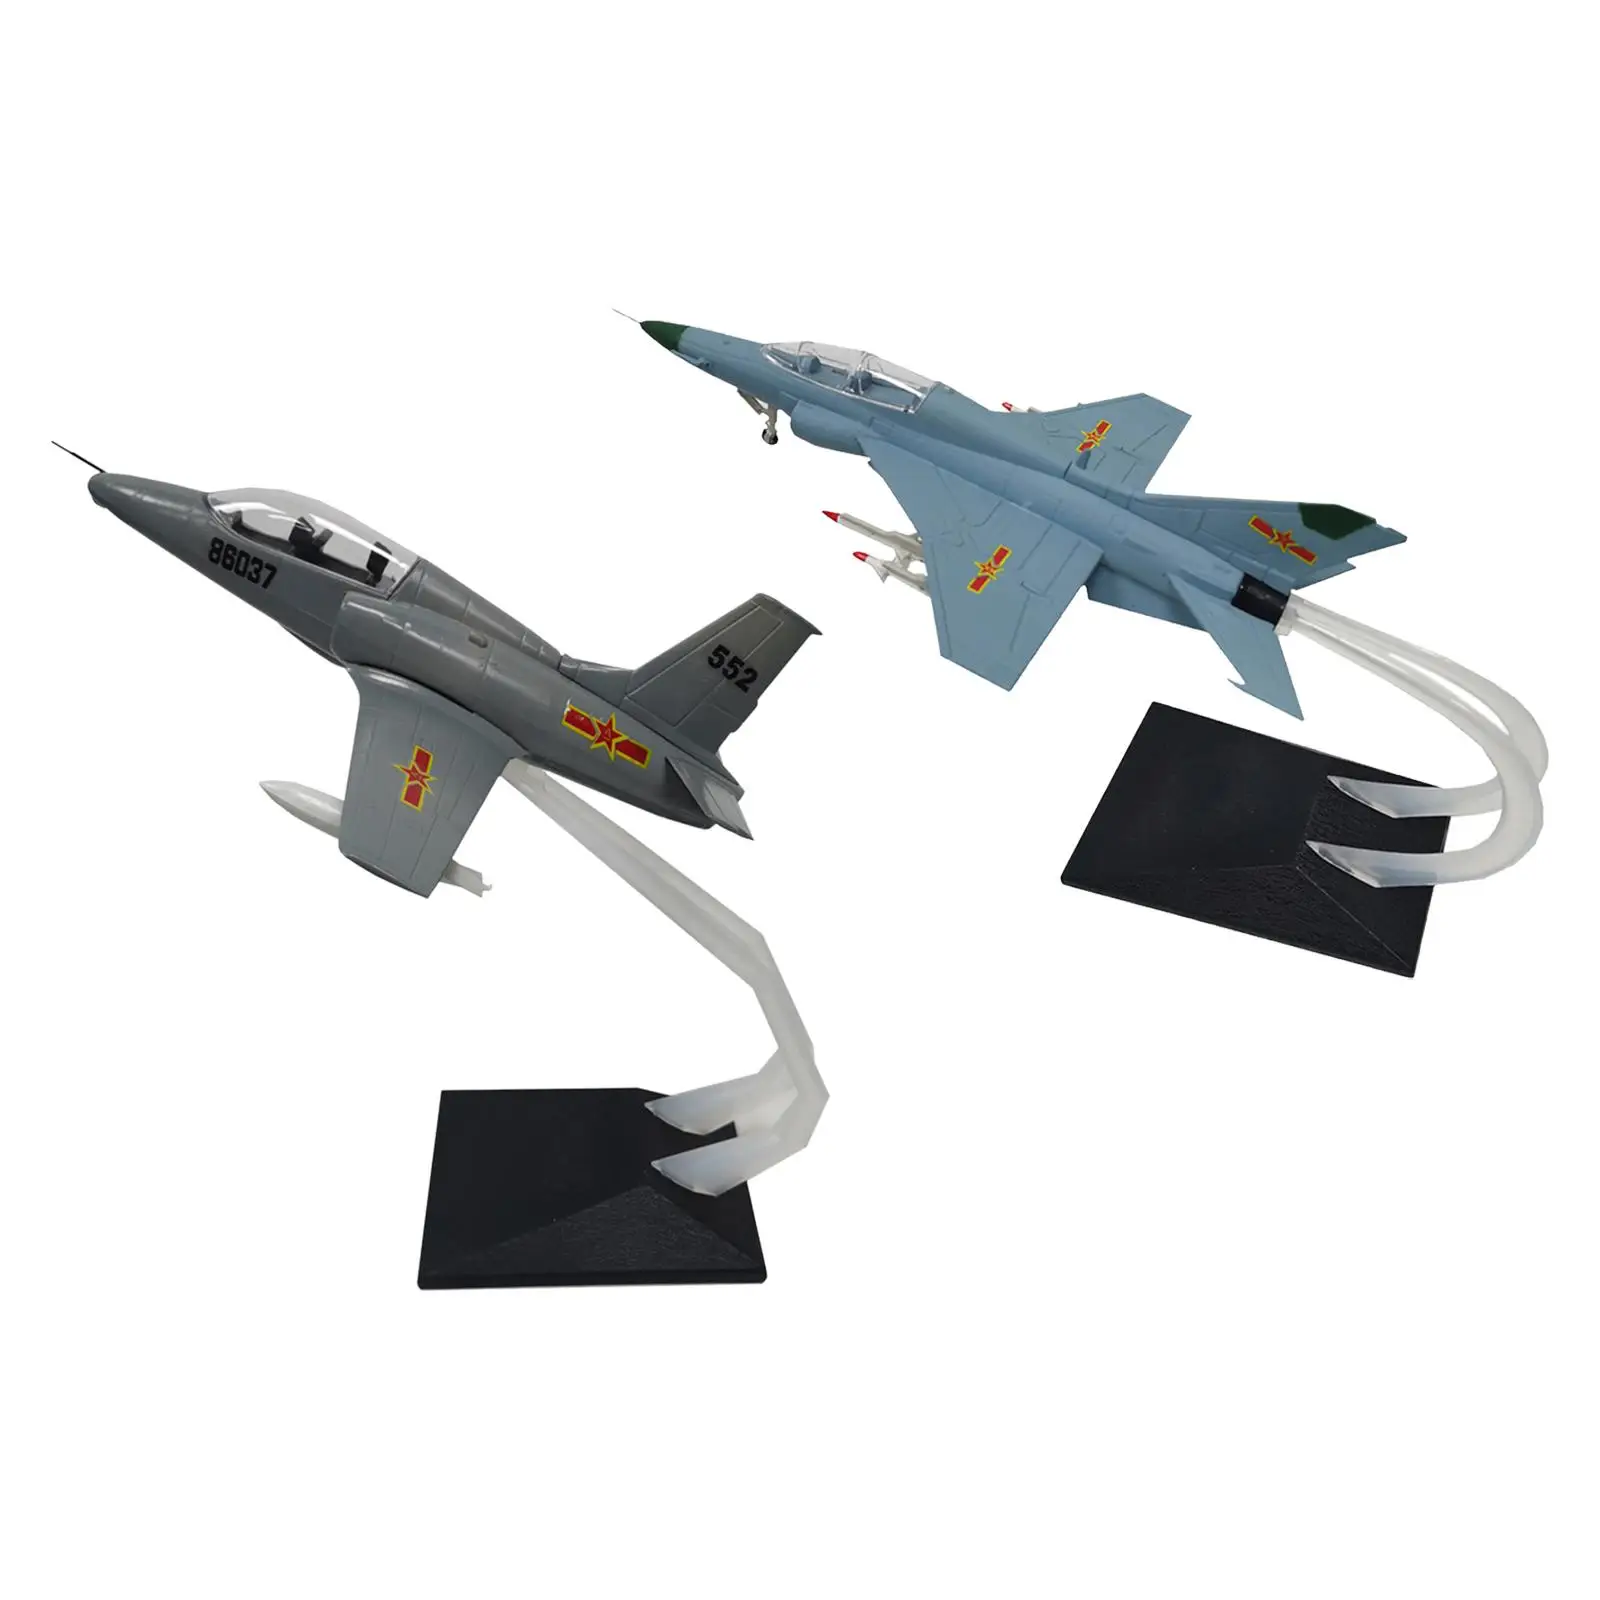 Fighter Model Collectibles 1/48 Scale Diecast Model Planes Alloy Metal Aircraft Toy for Living Room Bookshelf Cabinet Bar Office